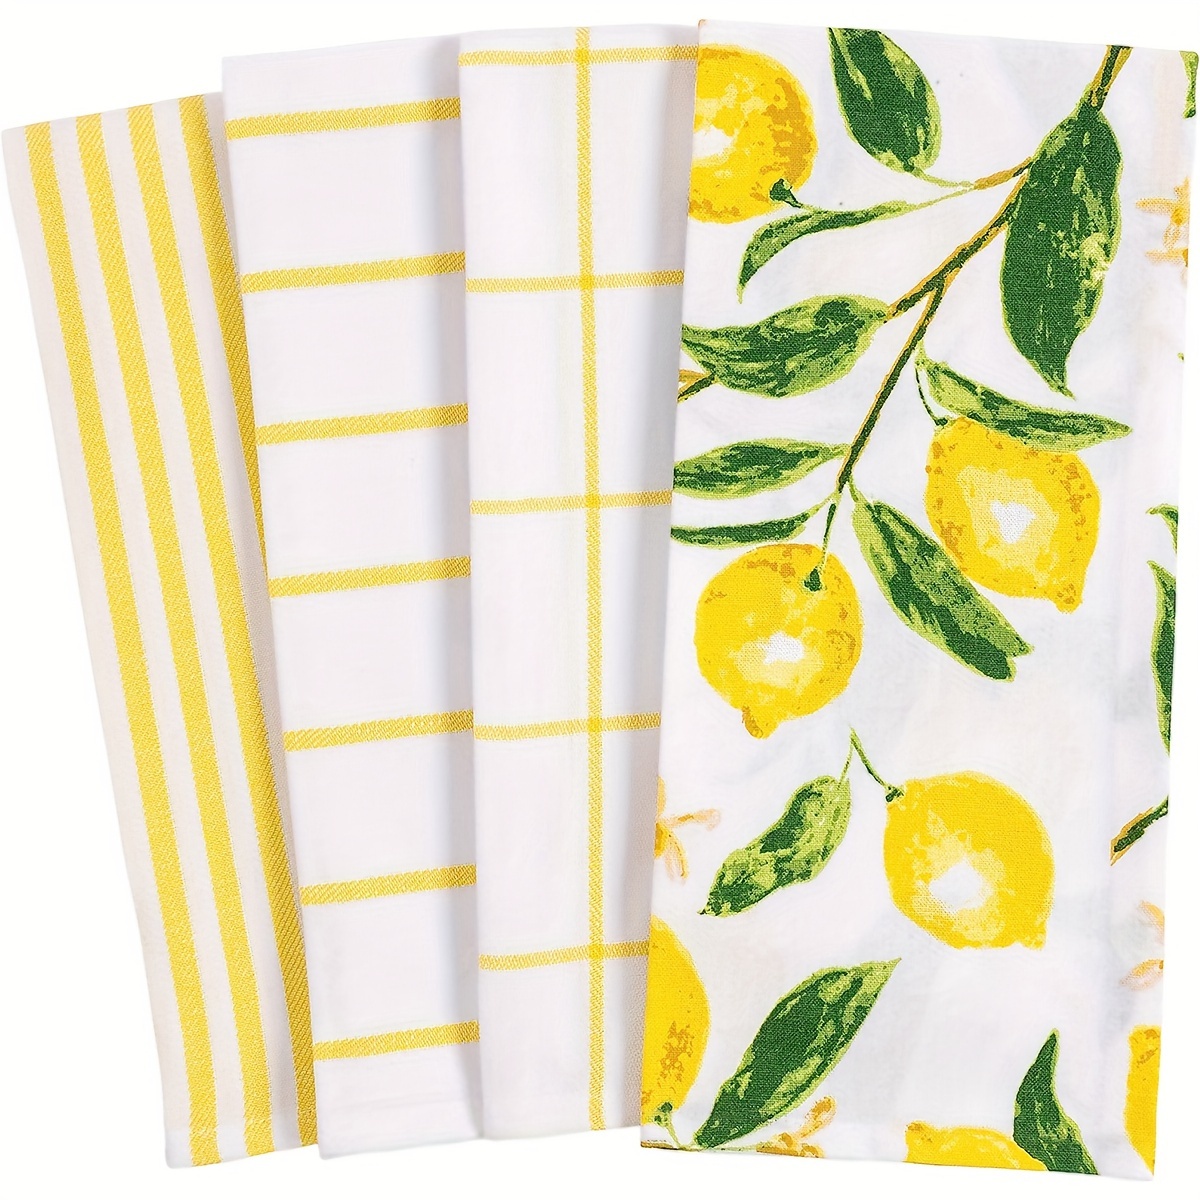 

Modern Lemon Print Microfiber Dish Cloths & Towels Set - 4 Pack - Super Absorbent, Machine Washable, Knit Fabric, Space-themed Kitchen Towels With Polyester & Polyamide Blend